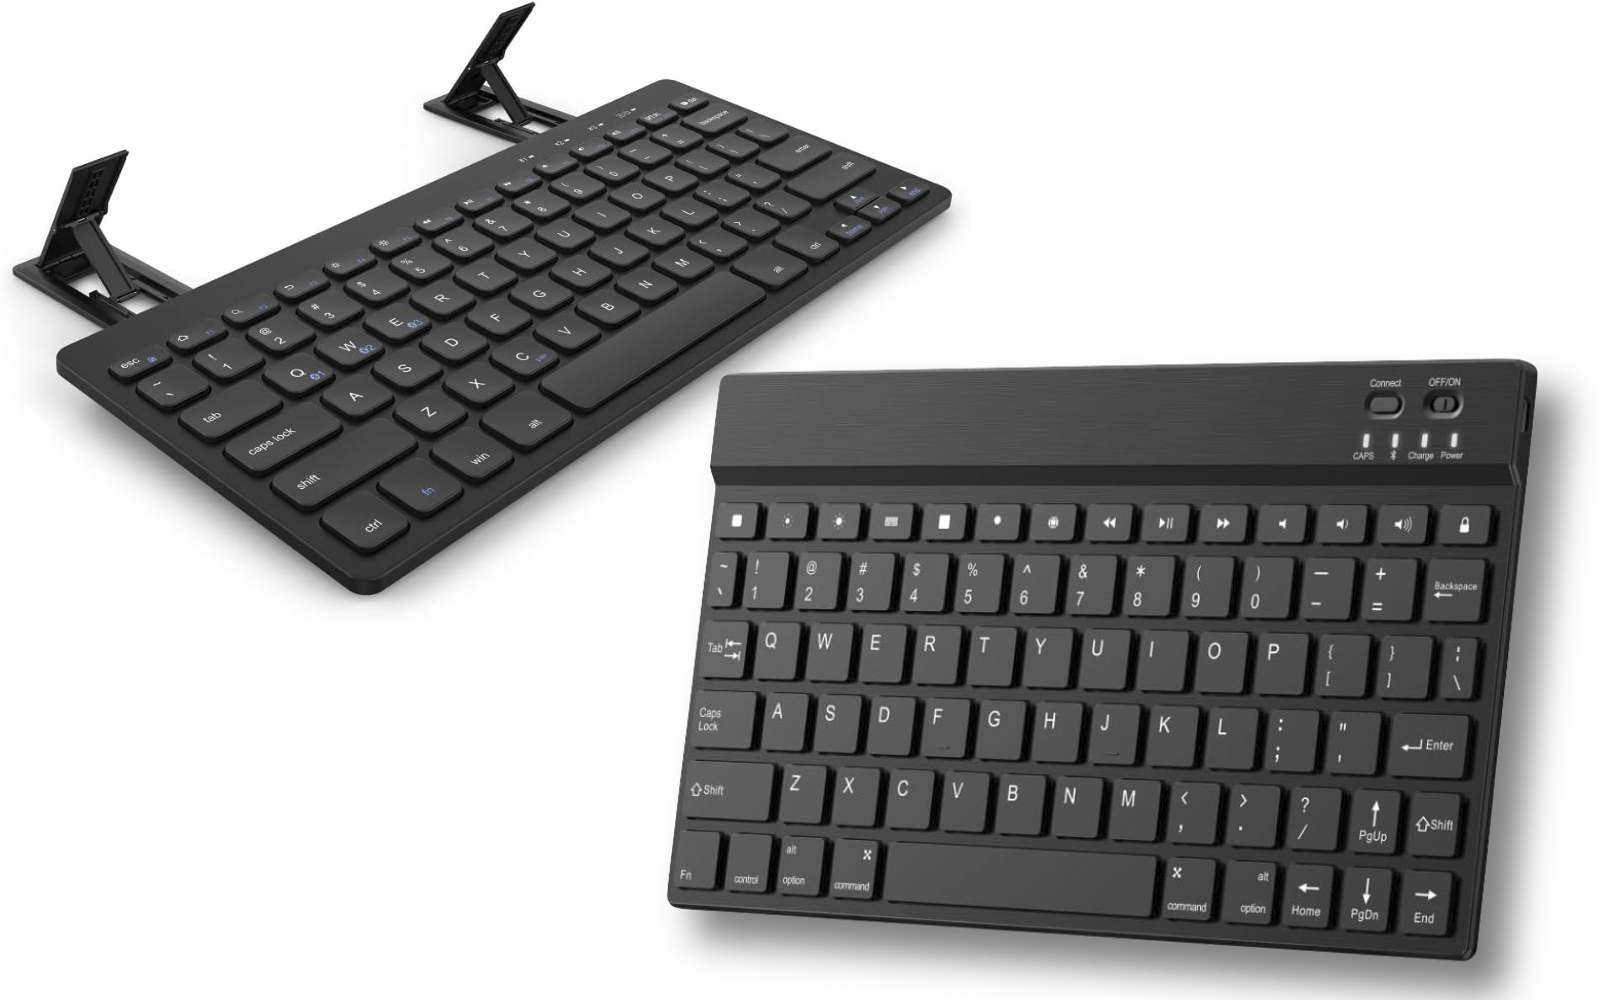 Anker-Keyboards-new-products.jpg